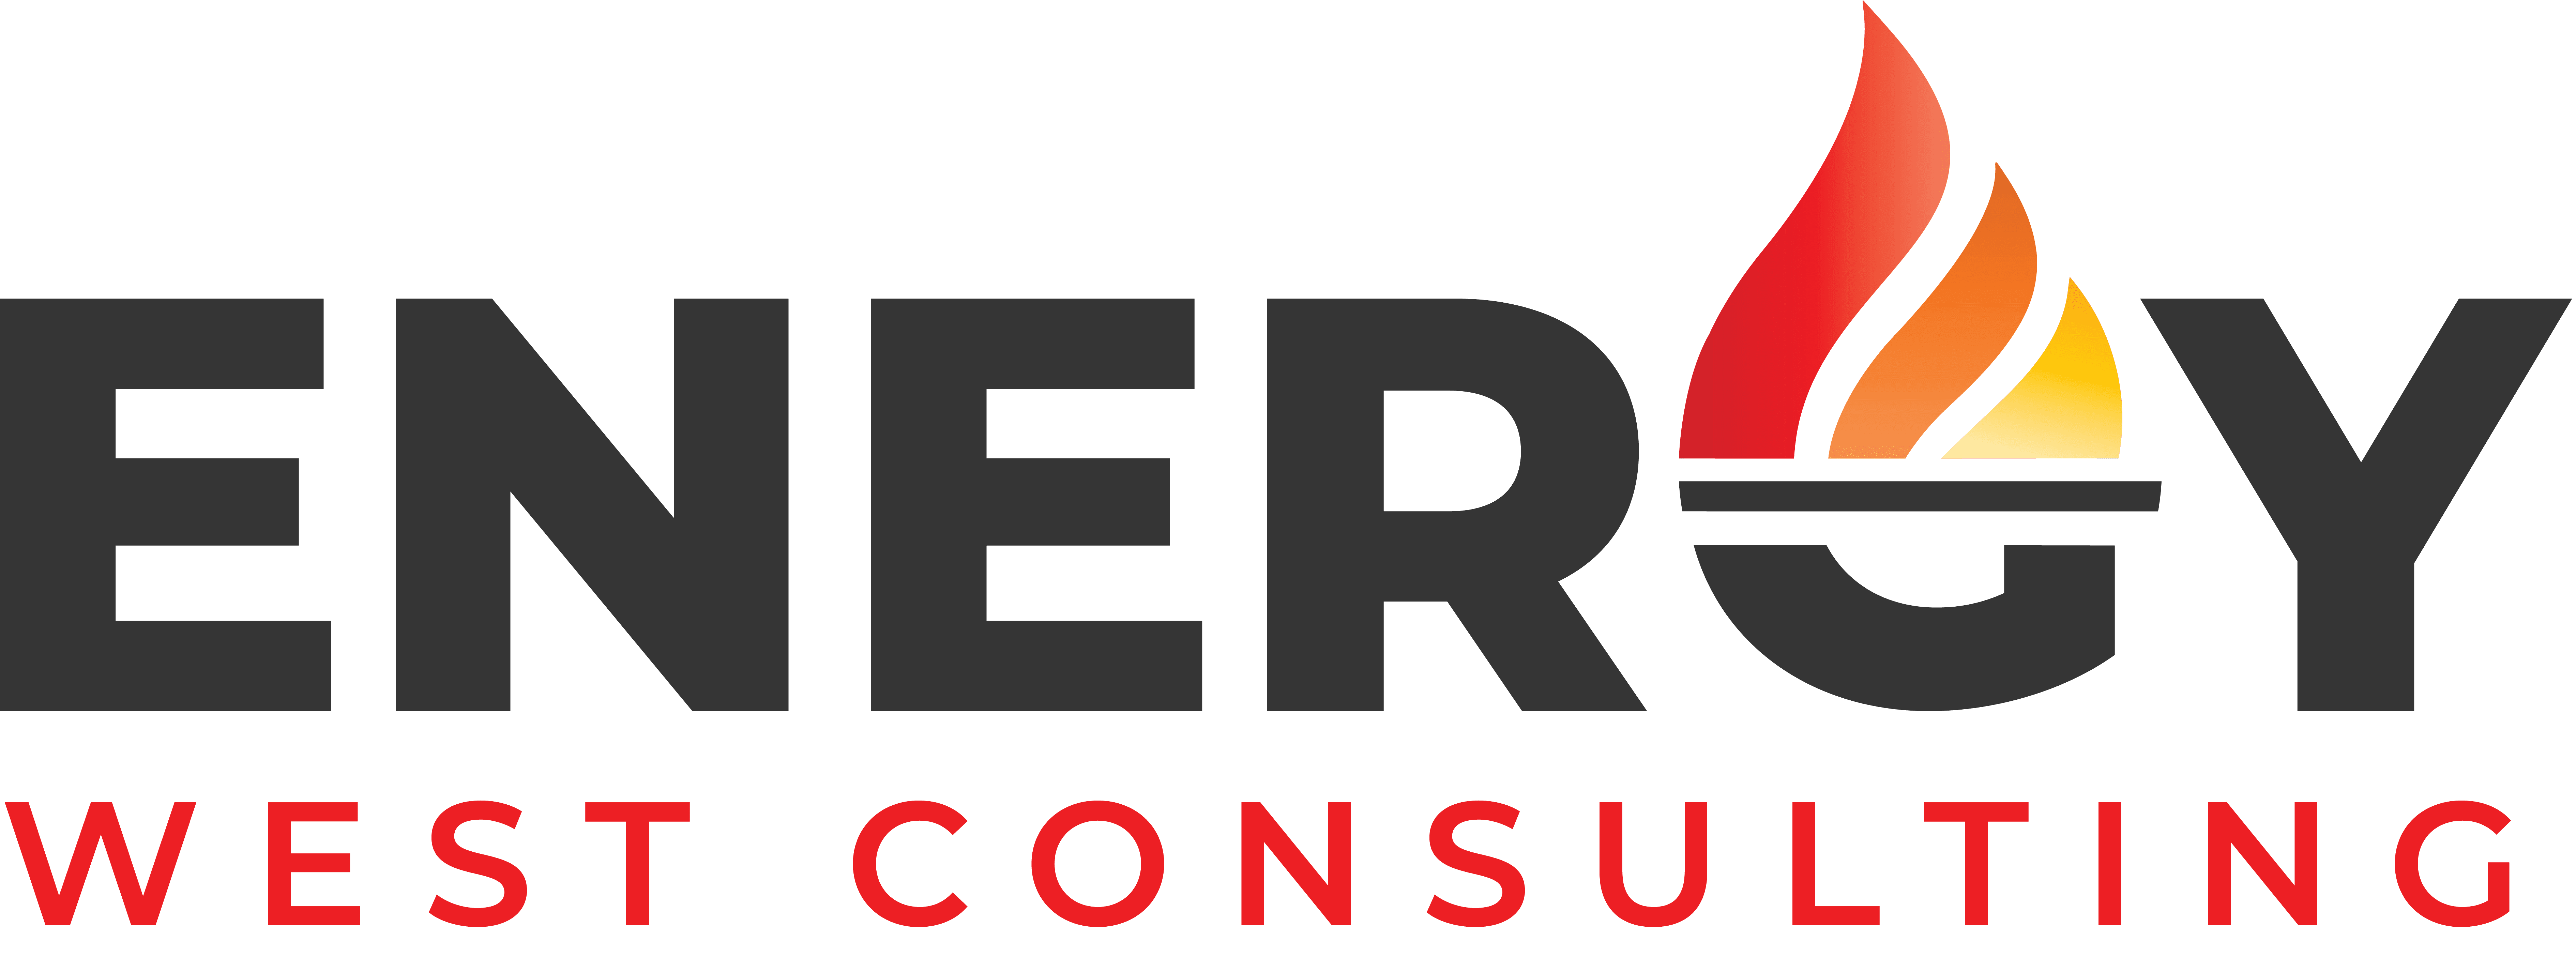 Energy West Consulting